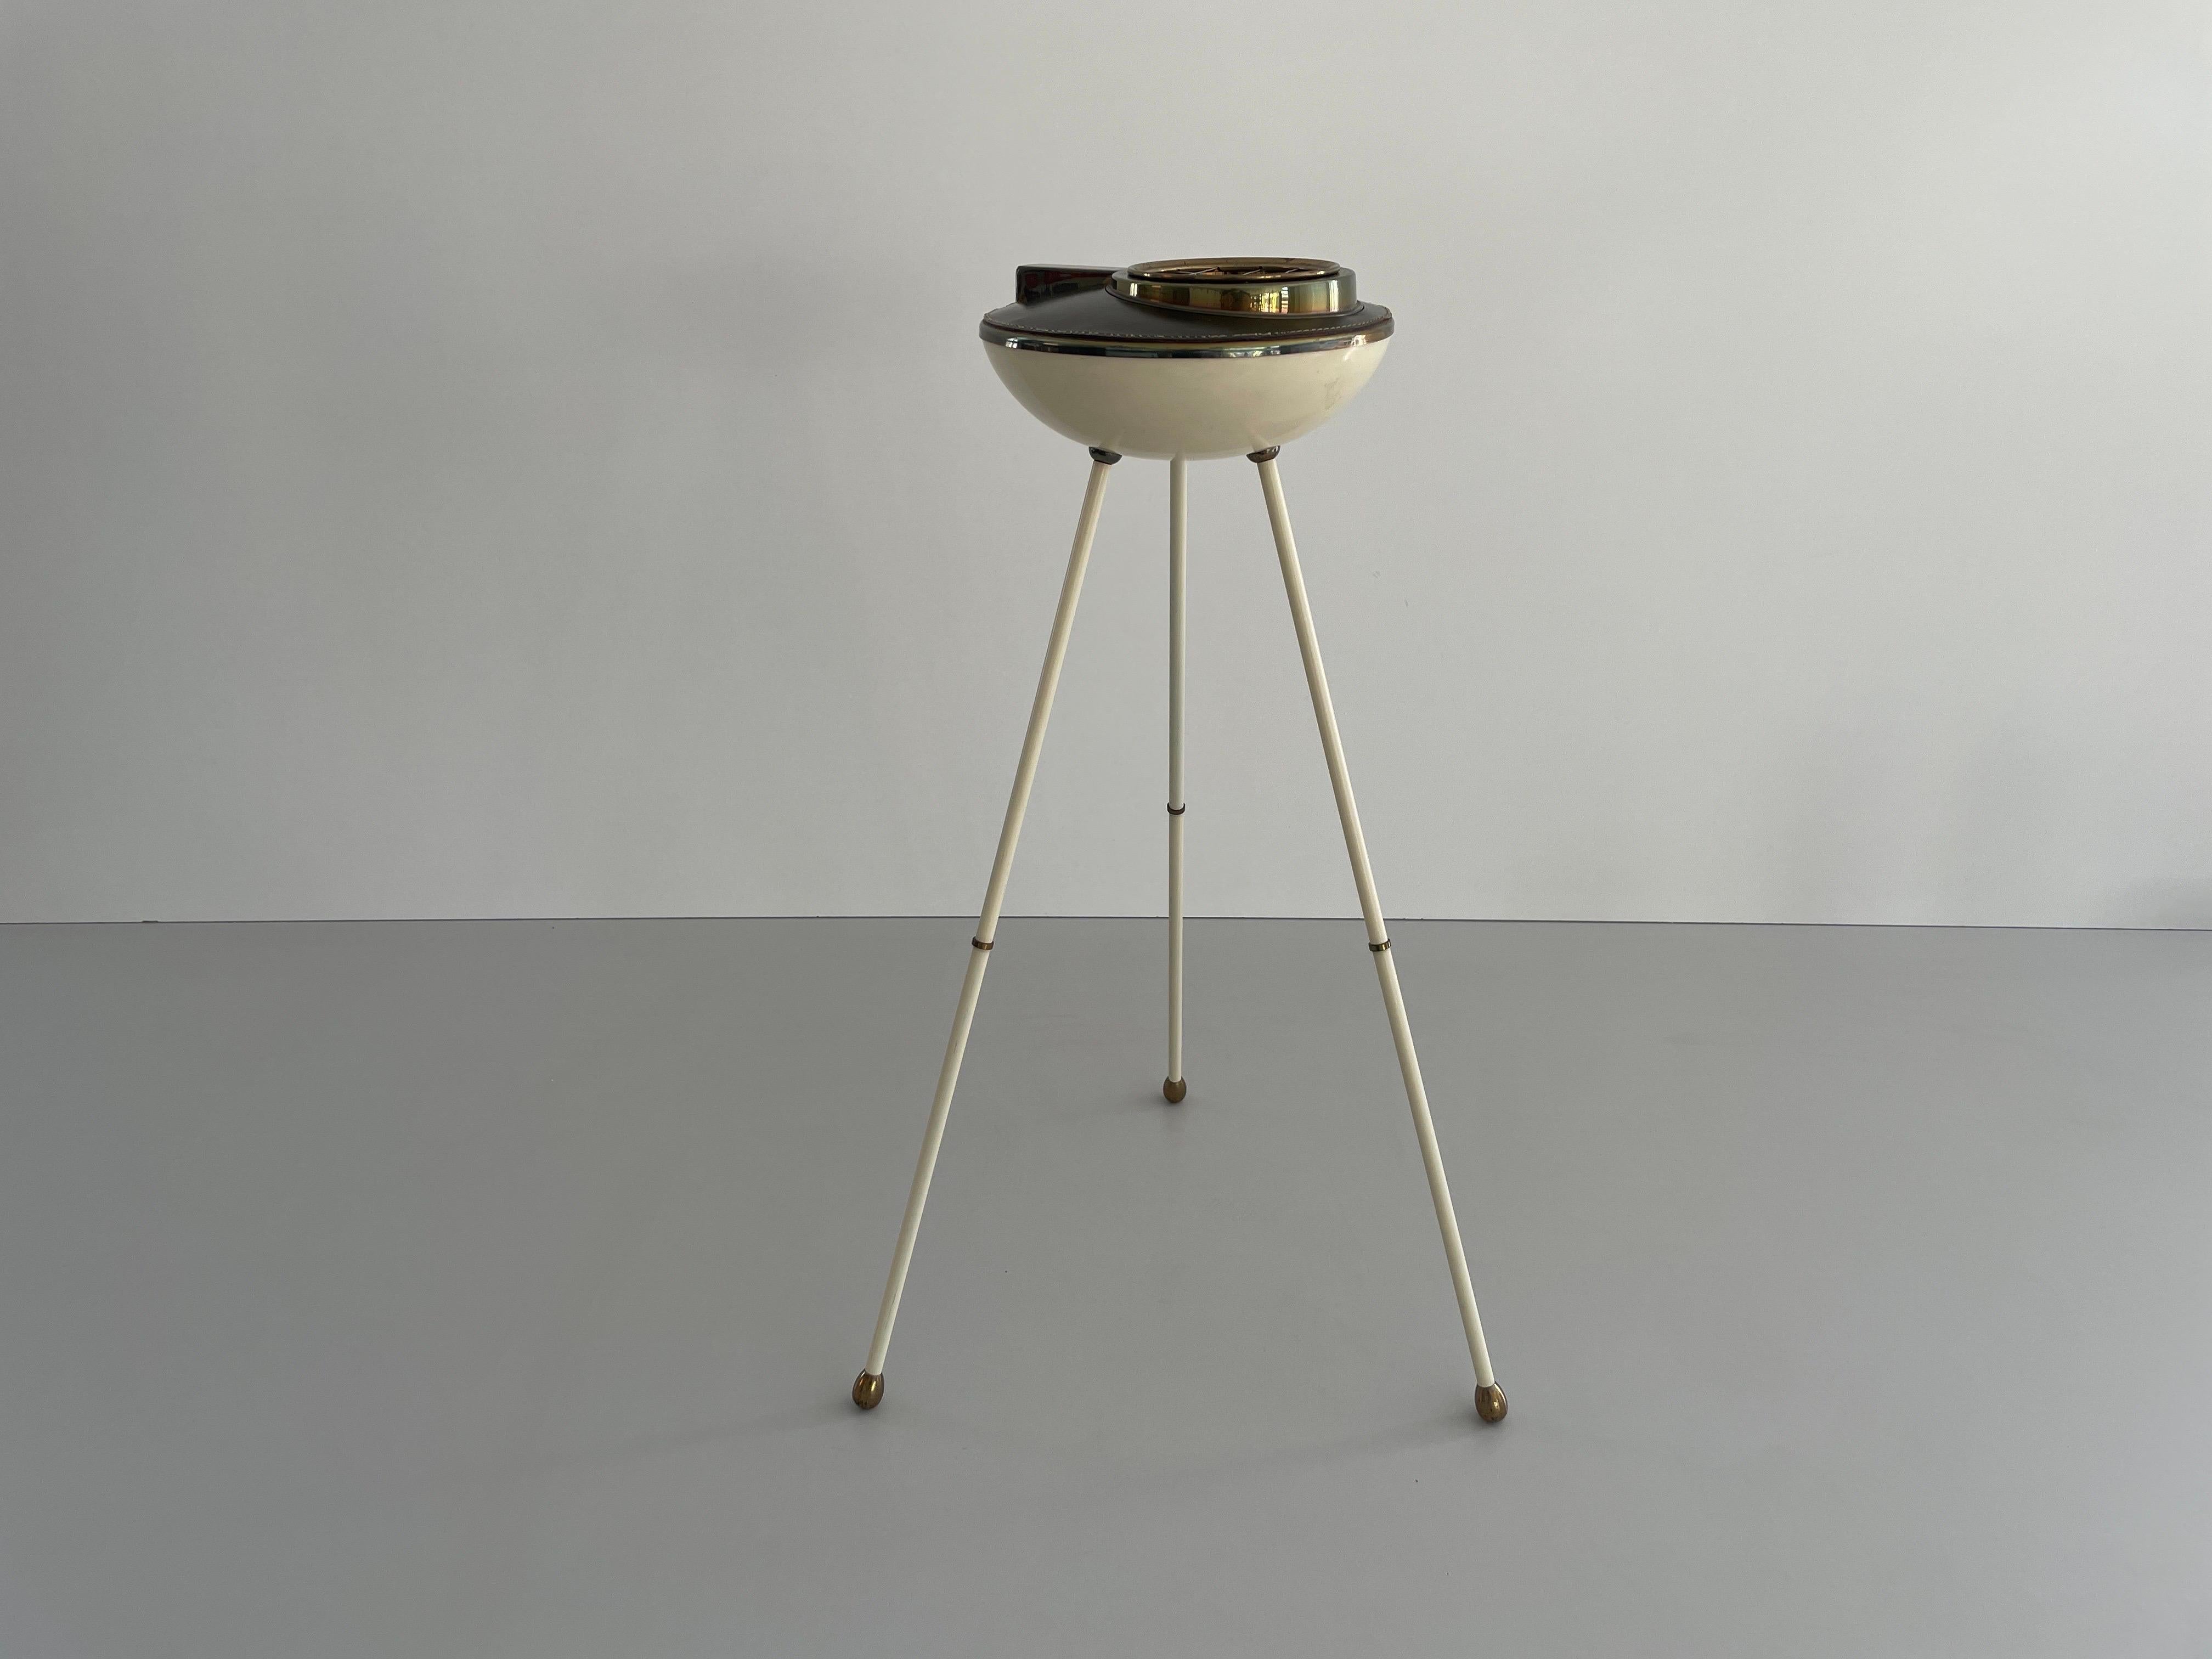 Mid-Century Modern Exclusive Ufo Design Black and White Metal Tripod Ashtray, 1950s, Italy For Sale